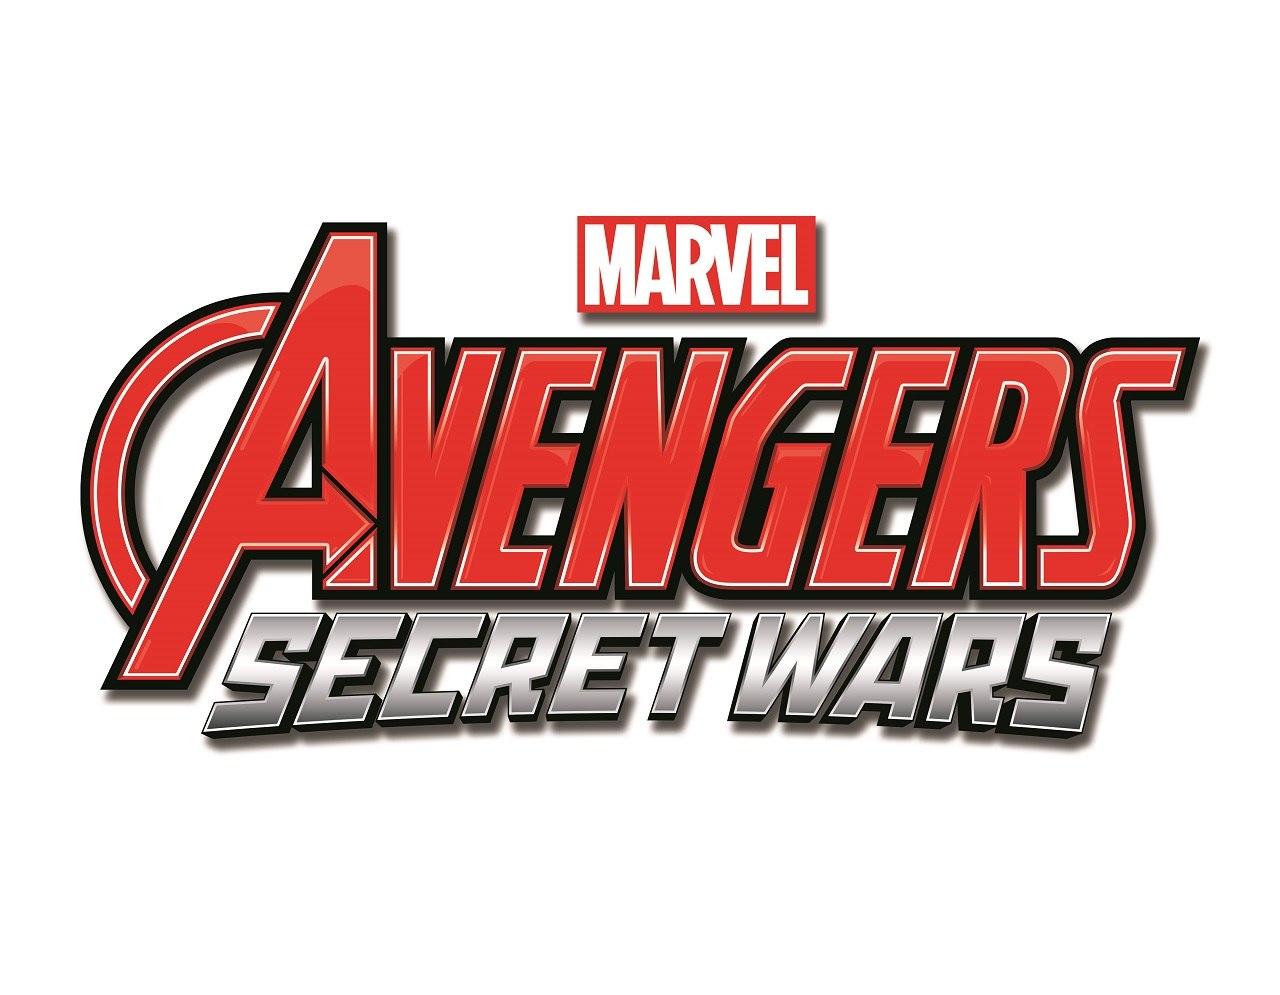 Avengers: Secret Wars To Be Directed By Black Panther Director